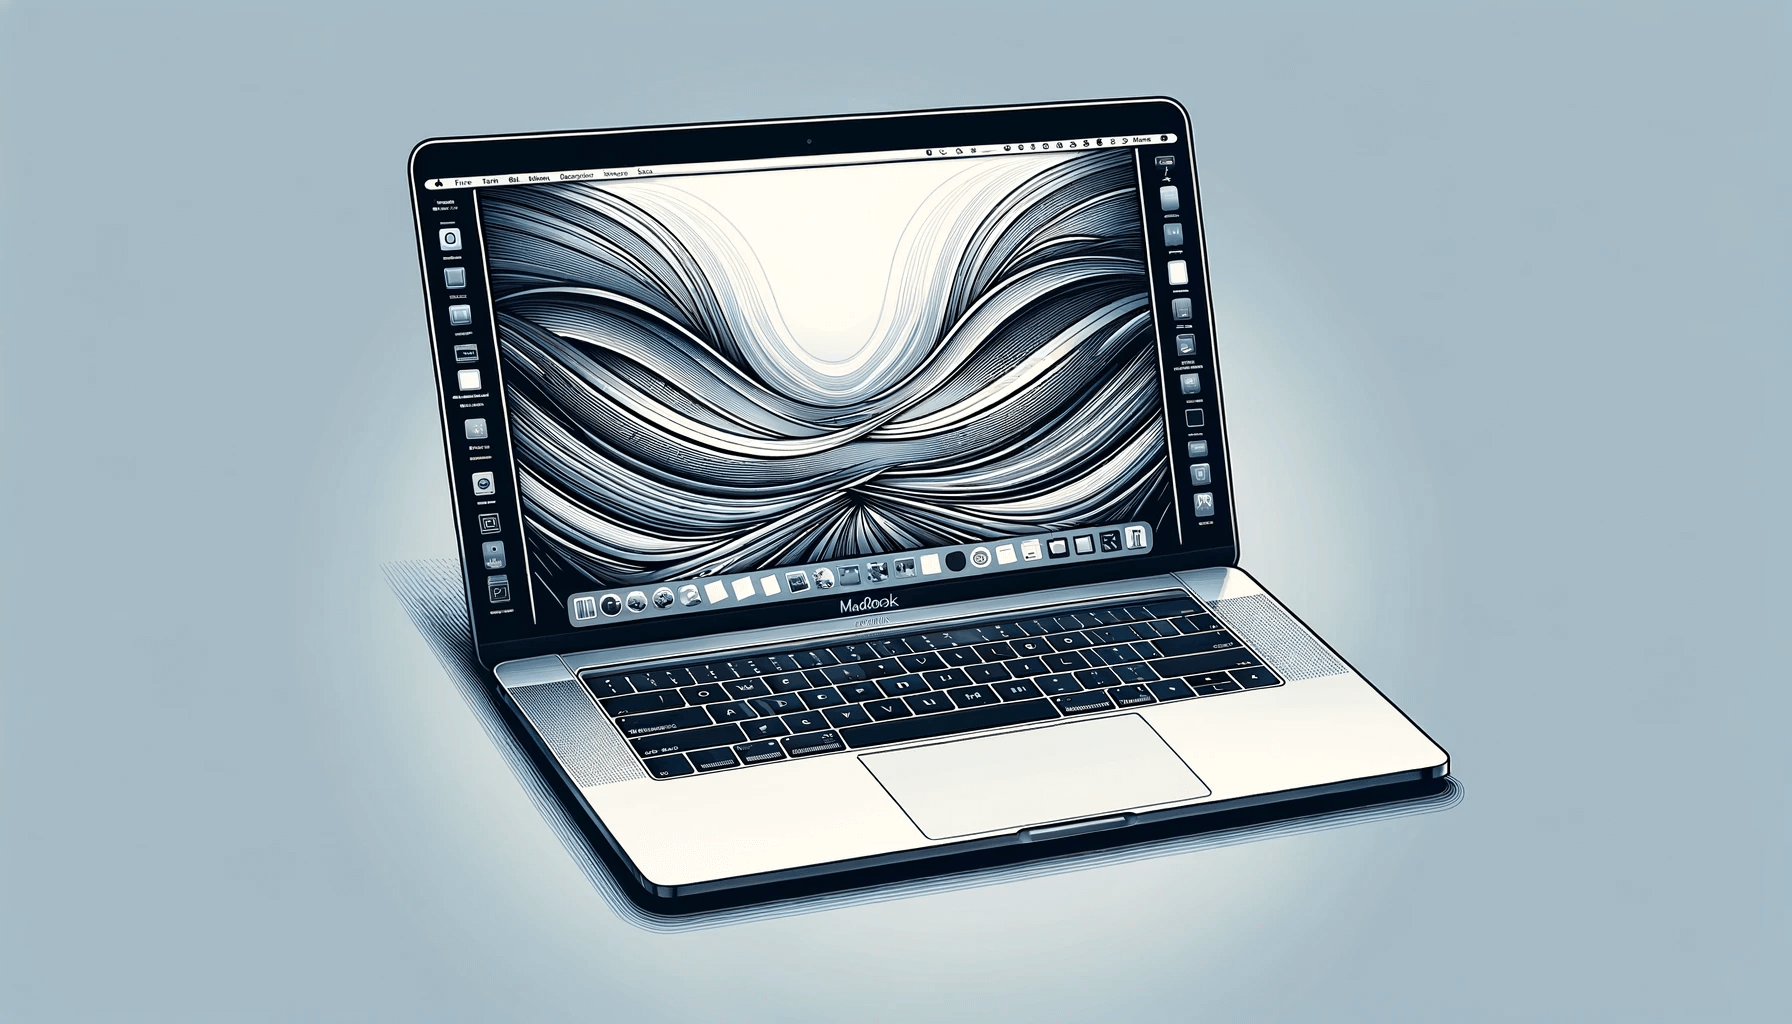 DALL·E 2023 12 22 17.07.03 A digital illustration of a MacBook with a focus on the keyboard. The MacBook is depicted open showcasing its high resolution screen and sleek design